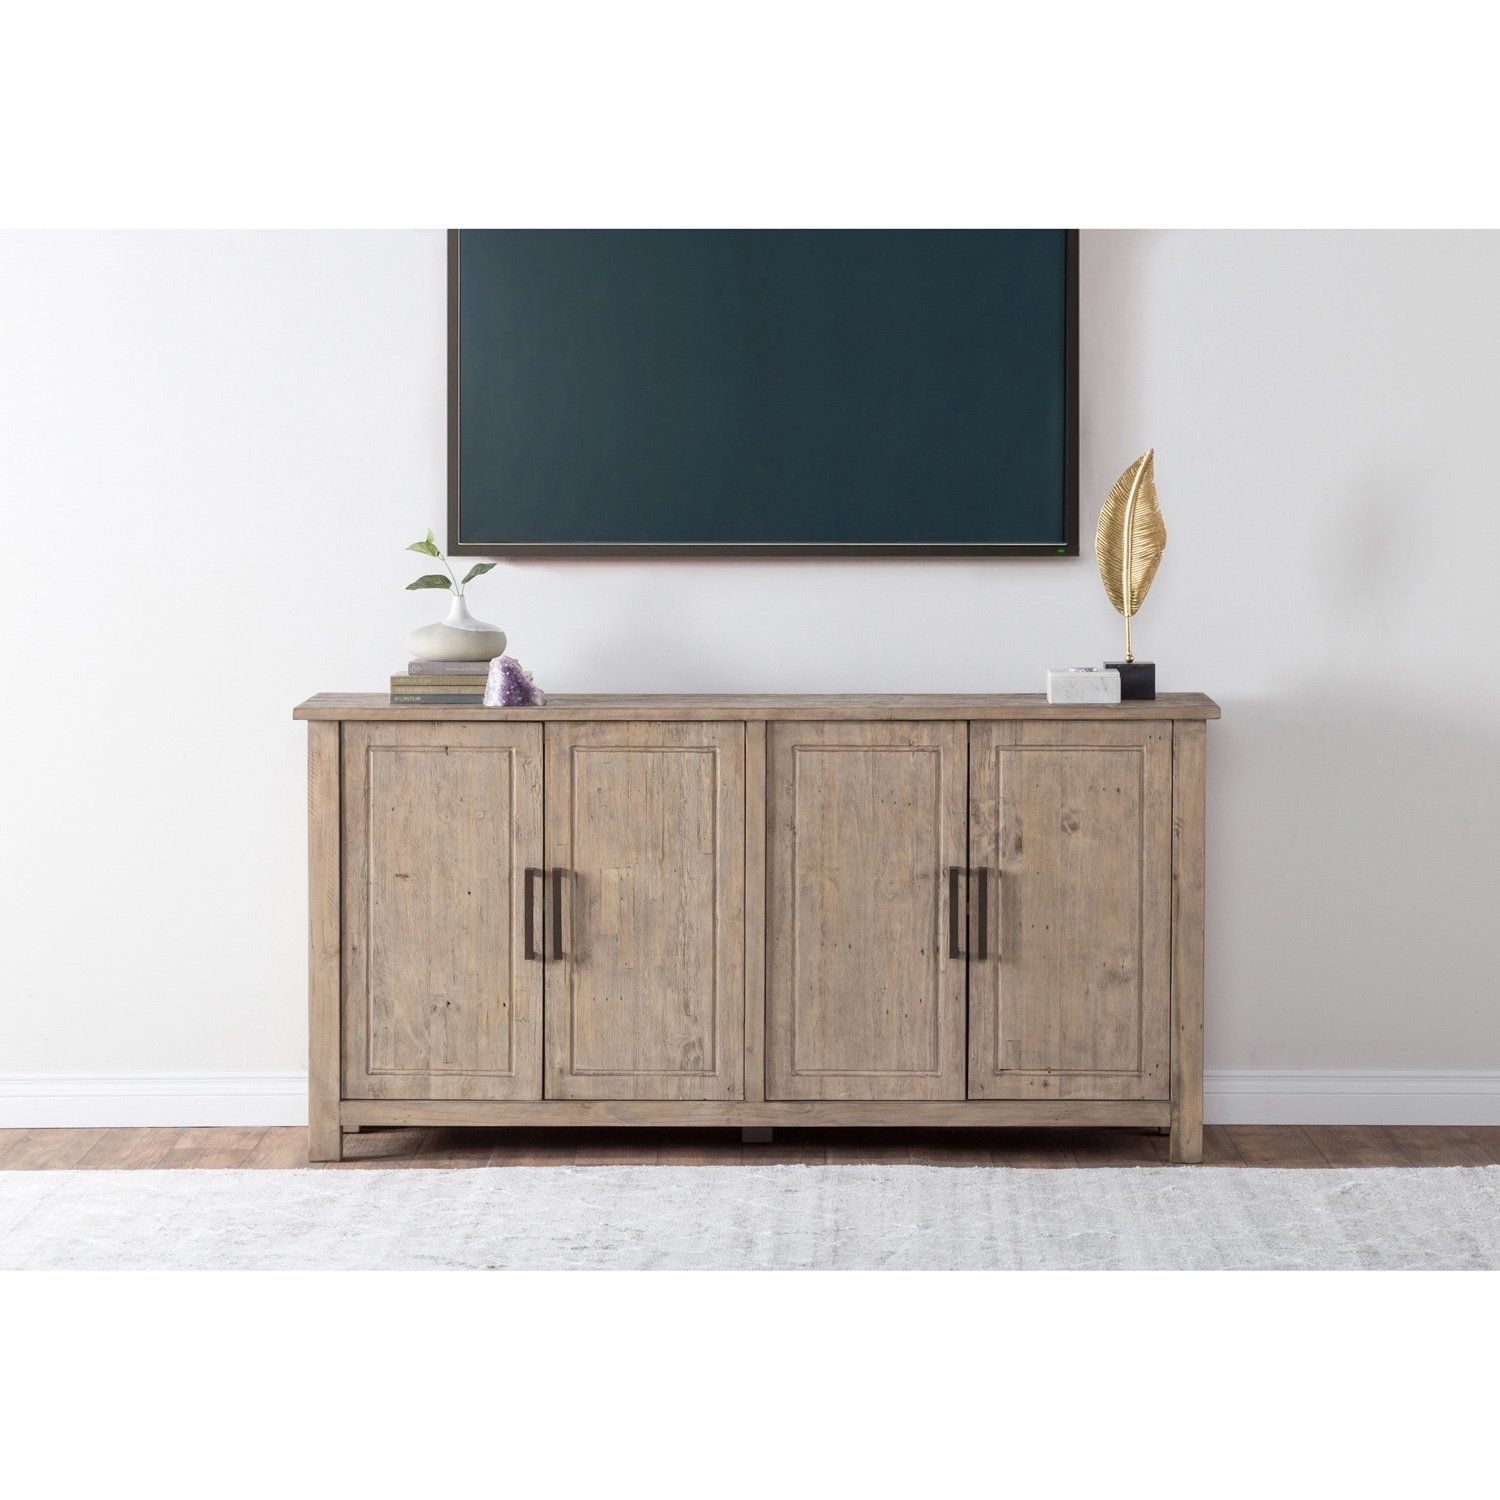 Shop Aires Reclaimed Wood 72 Inch Sideboardkosas Home – Free For Most Recent Brown Wood 72 Inch Sideboards (Photo 9 of 20)